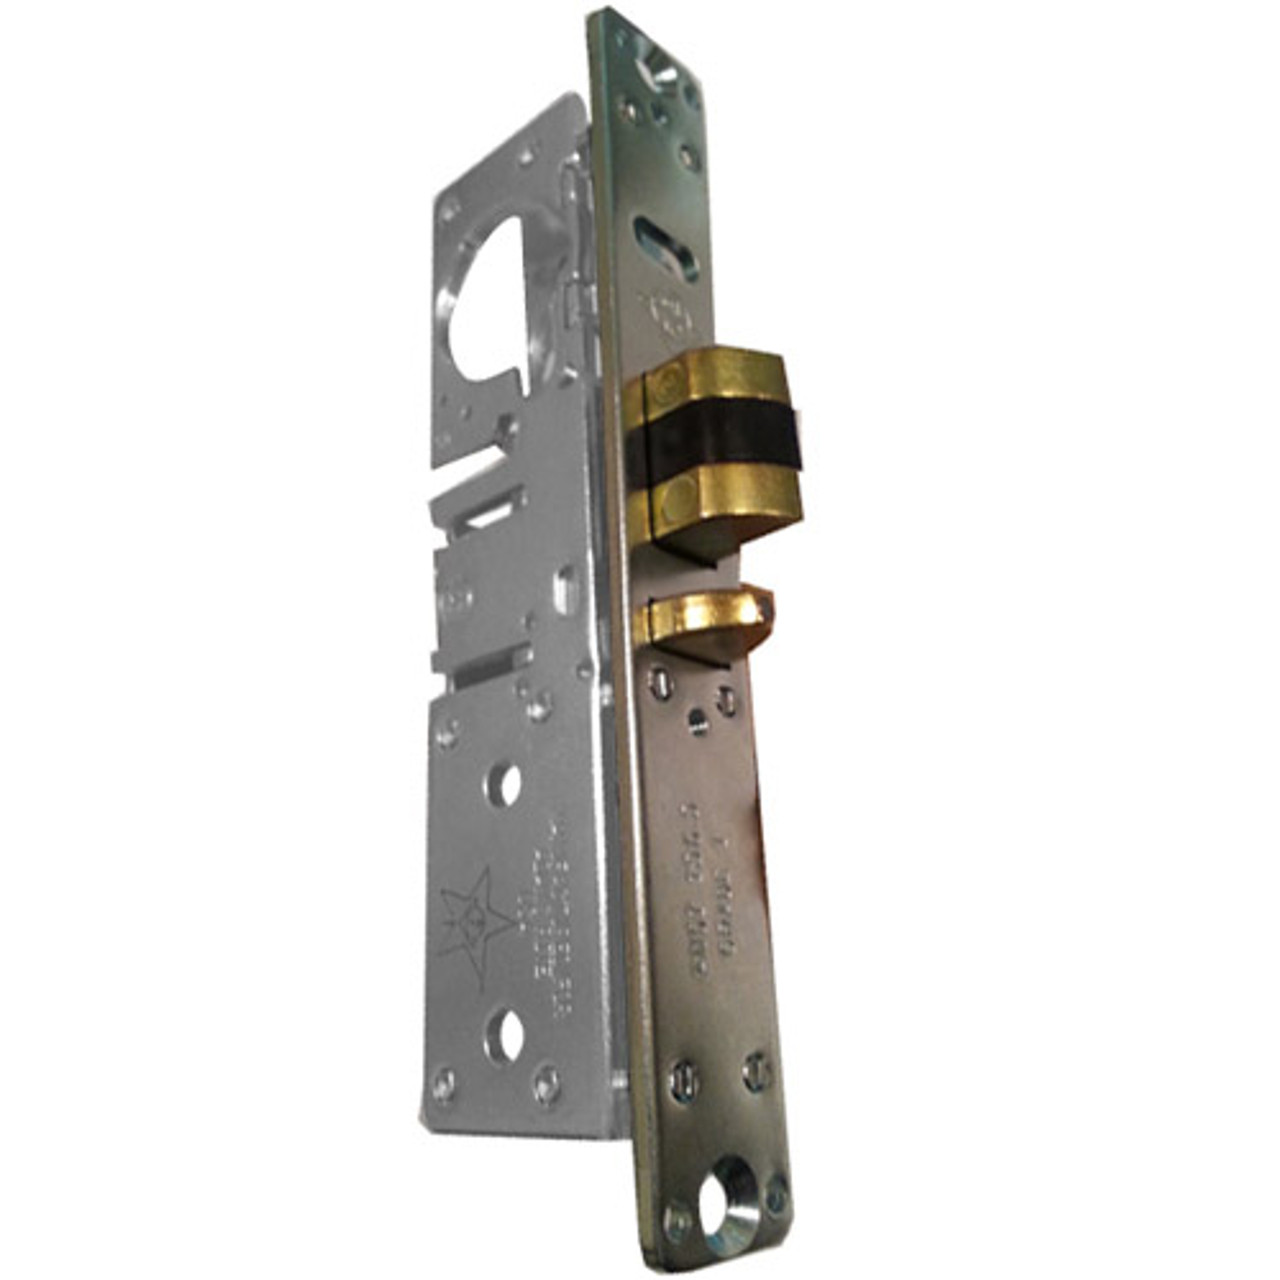 4512-16-102-628 Adams Rite Standard Deadlatch with Bevel Faceplate in Clear Anodized Finish